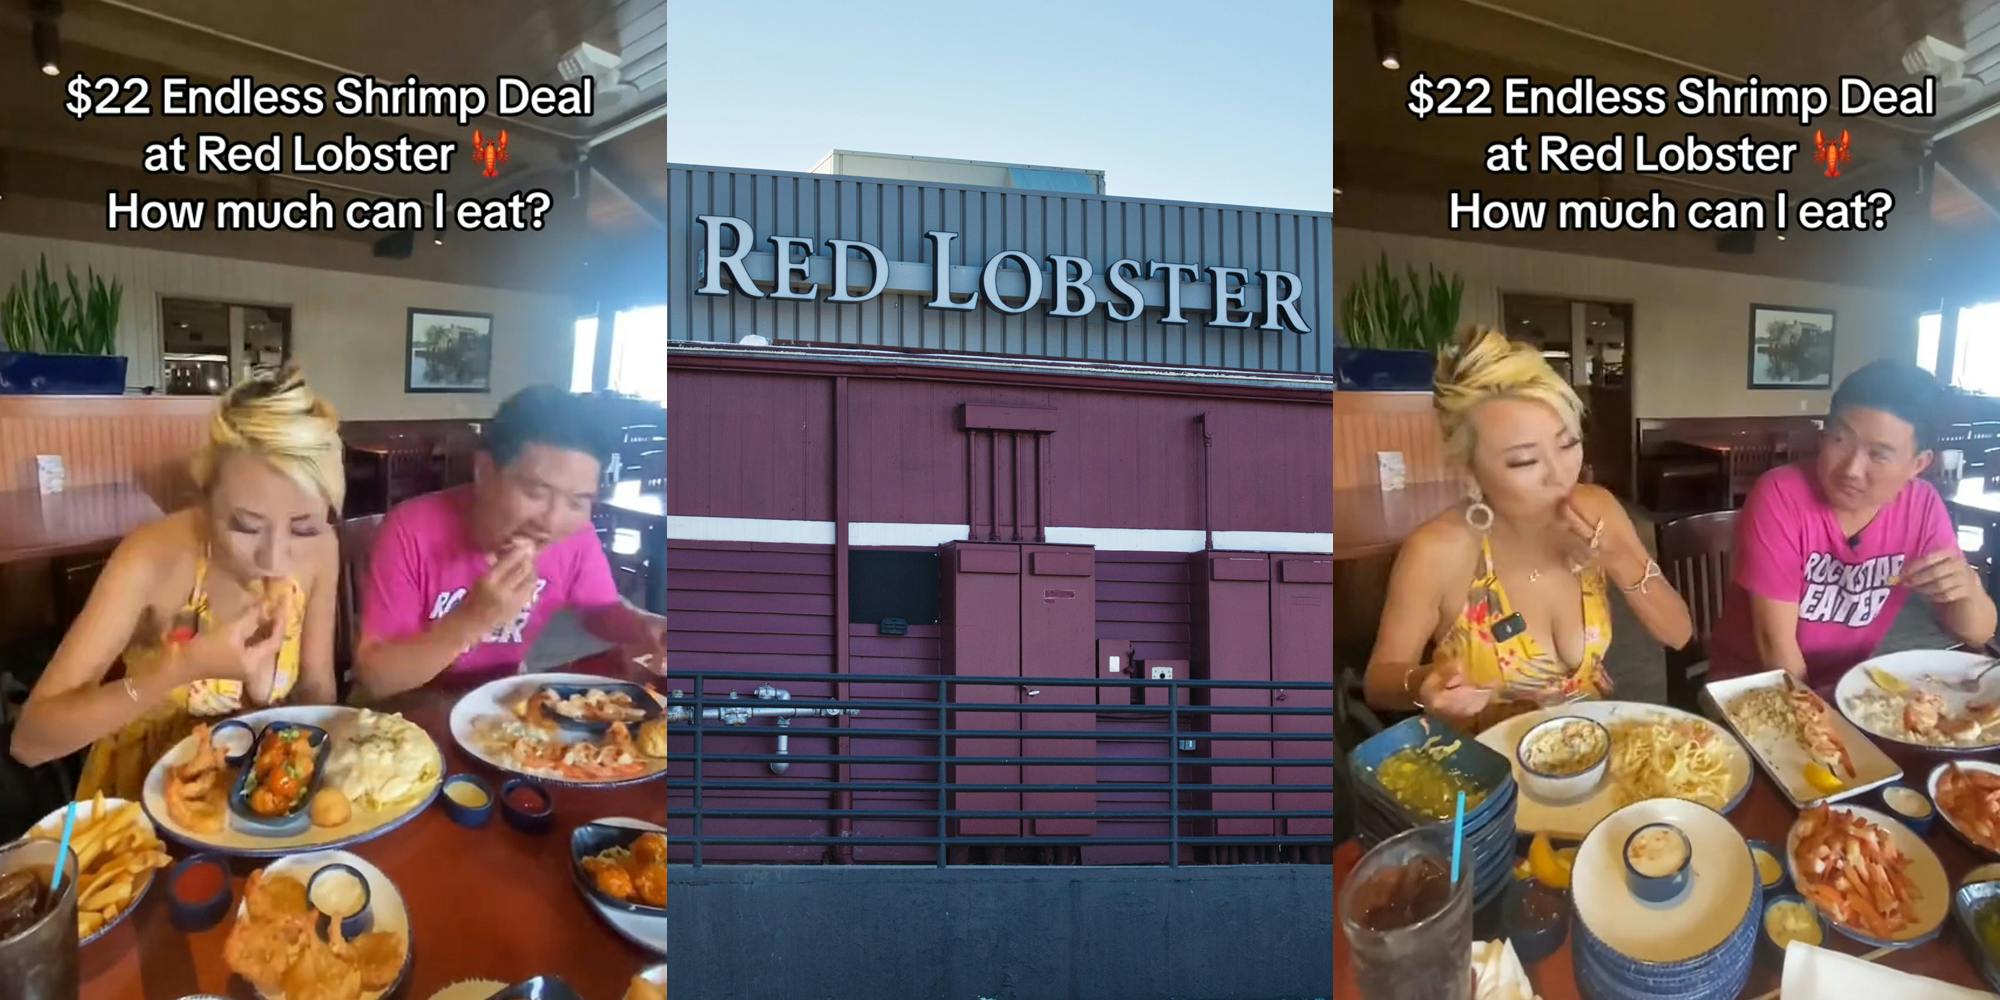 Red Lobster customers eating with caption "$22 Endless Shrimp Deal at Red Lobster How much can I eat?" (l) Red Lobster building with sign (c) Red Lobster customers eating with caption "$22 Endless Shrimp Deal at Red Lobster How much can I eat?" (r)